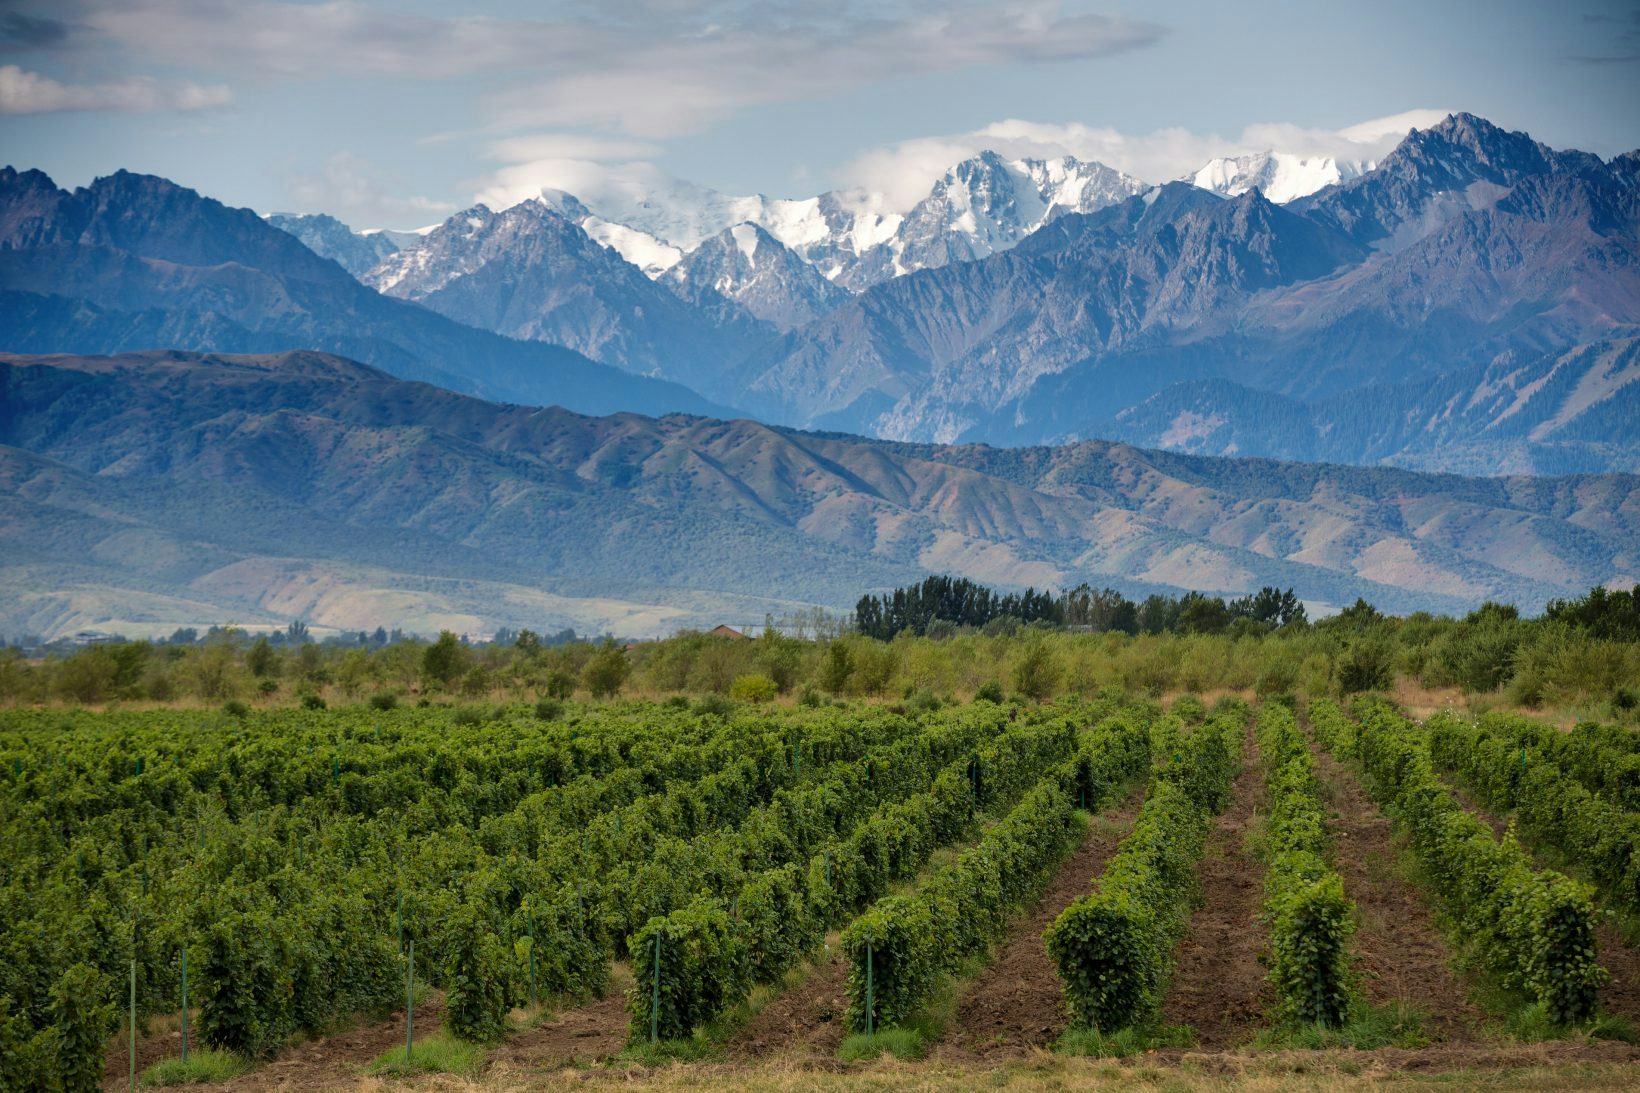 Argentine wines, a global market on the rise